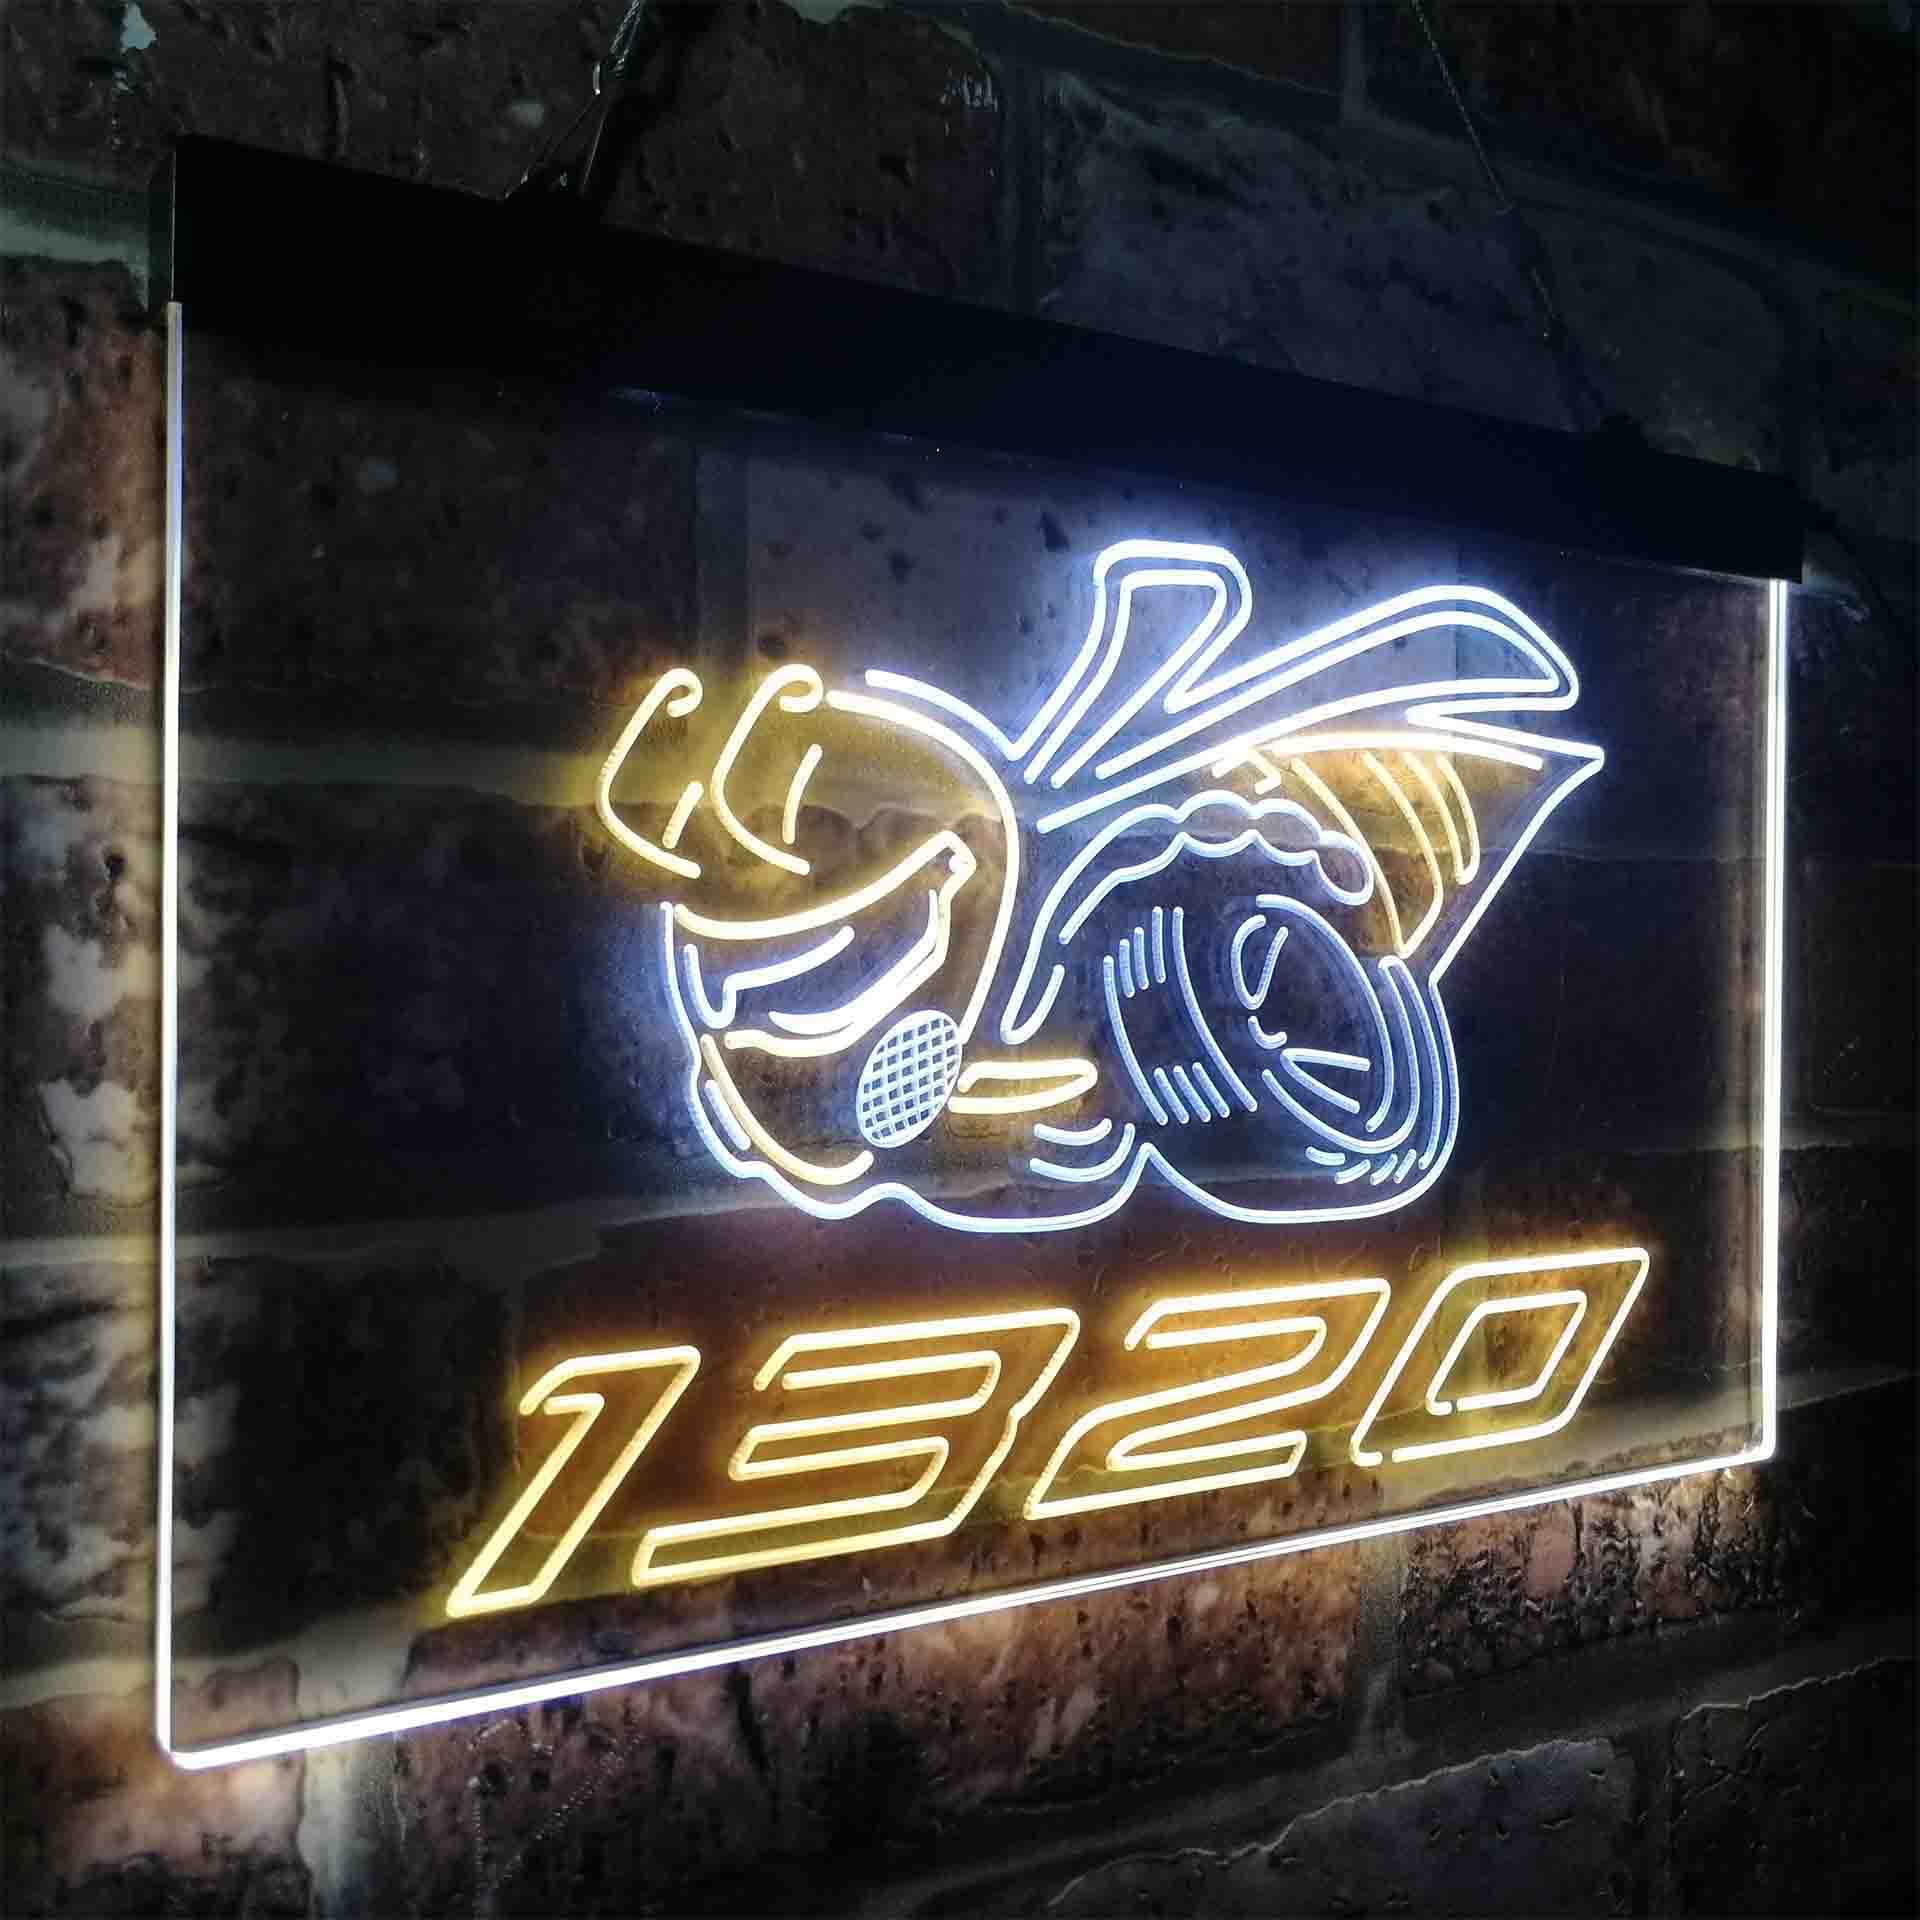 DG Angry Bee 1320 Super Bee LED Neon Sign